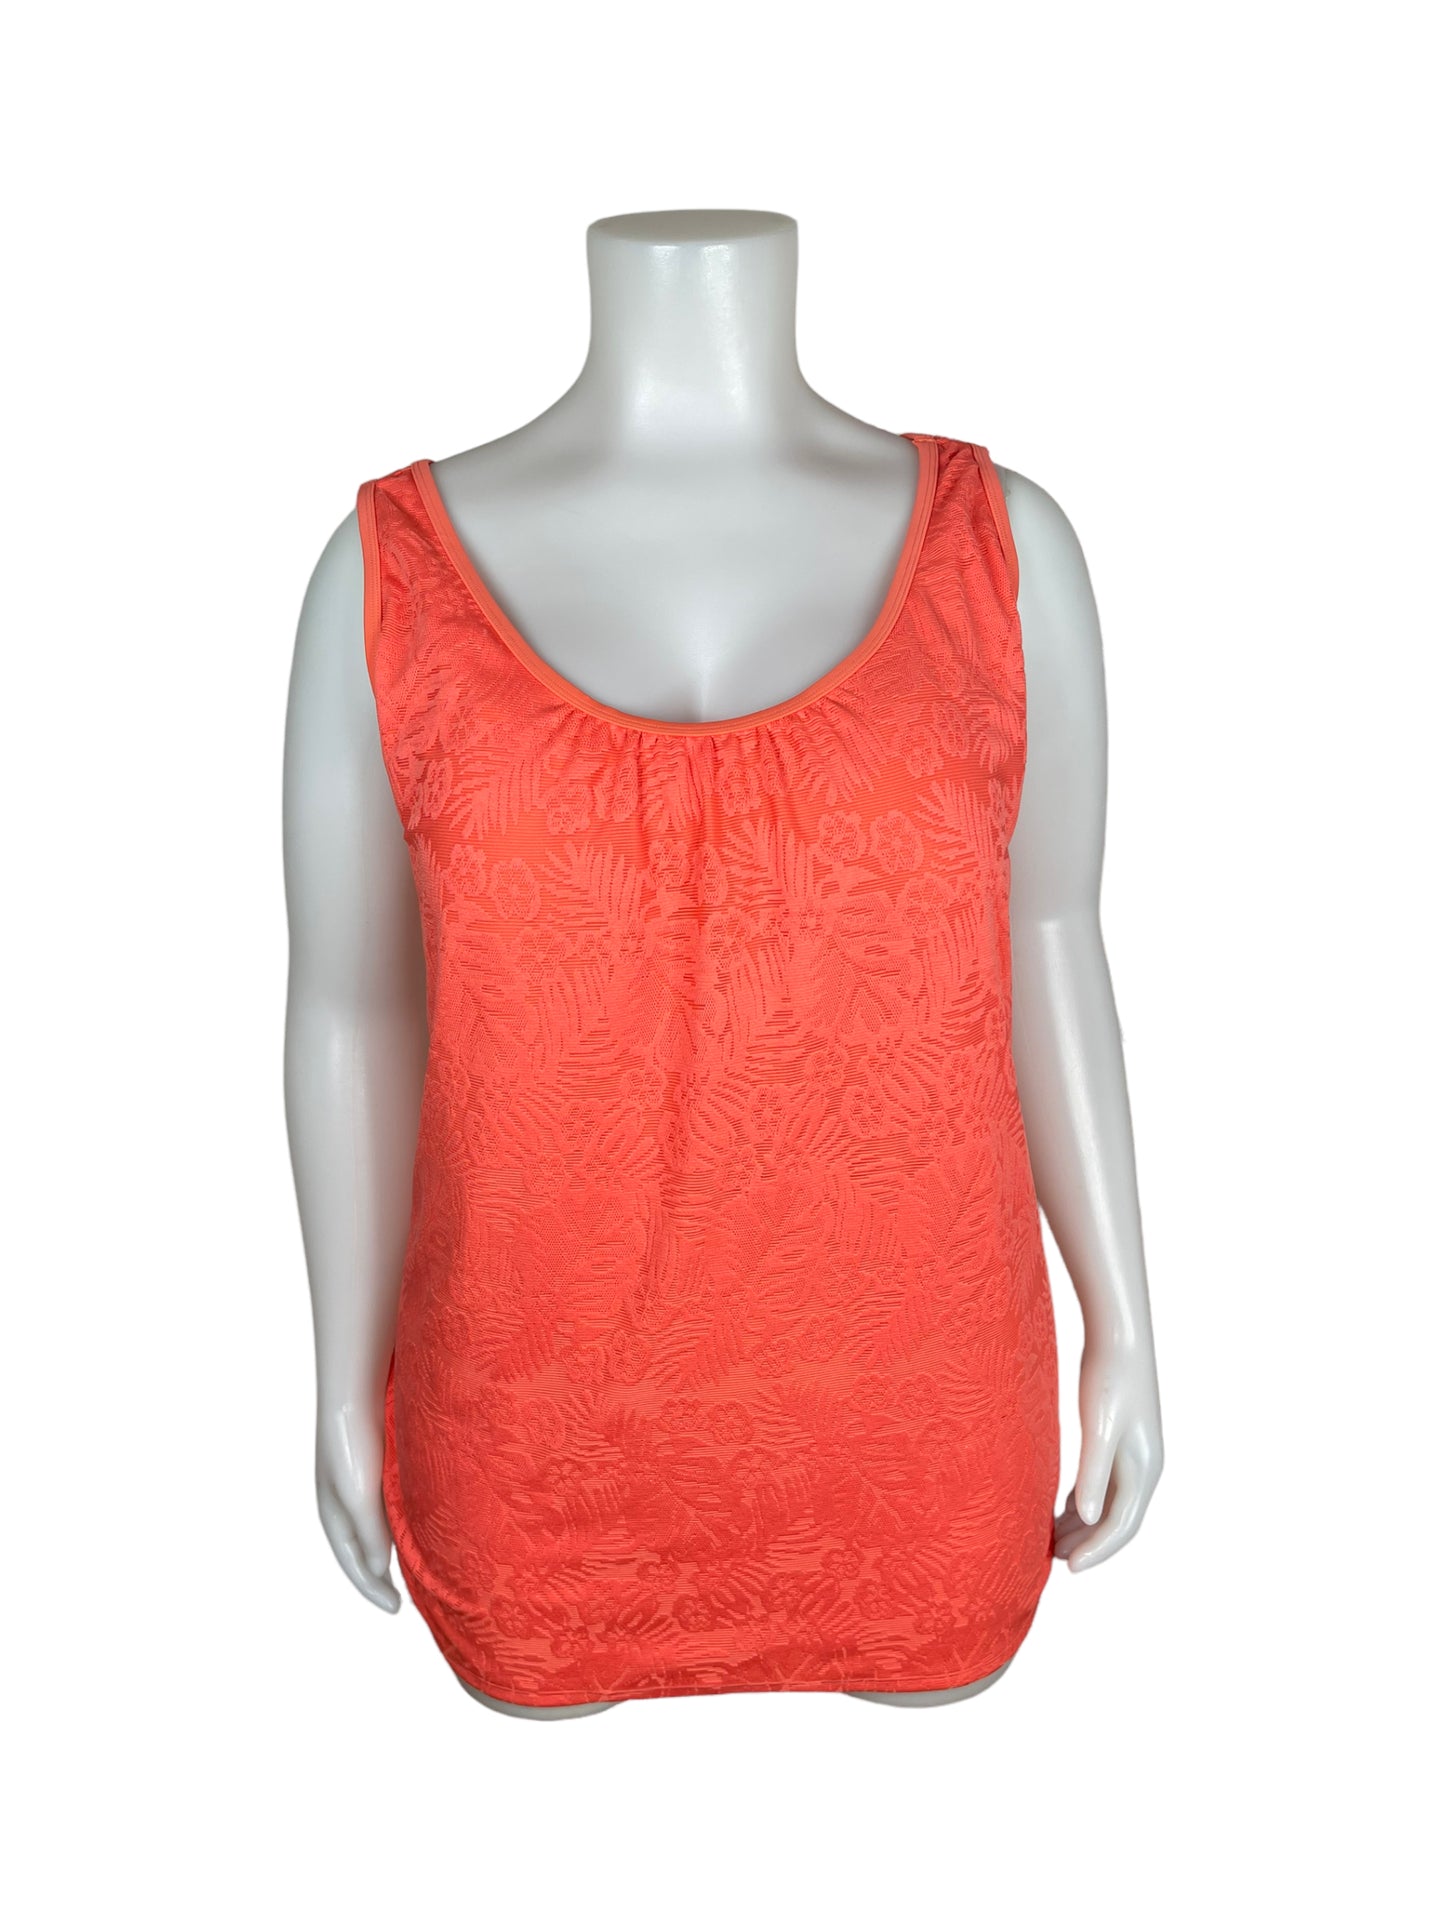 “Sea” Coral Swimsuit Top  (6X)